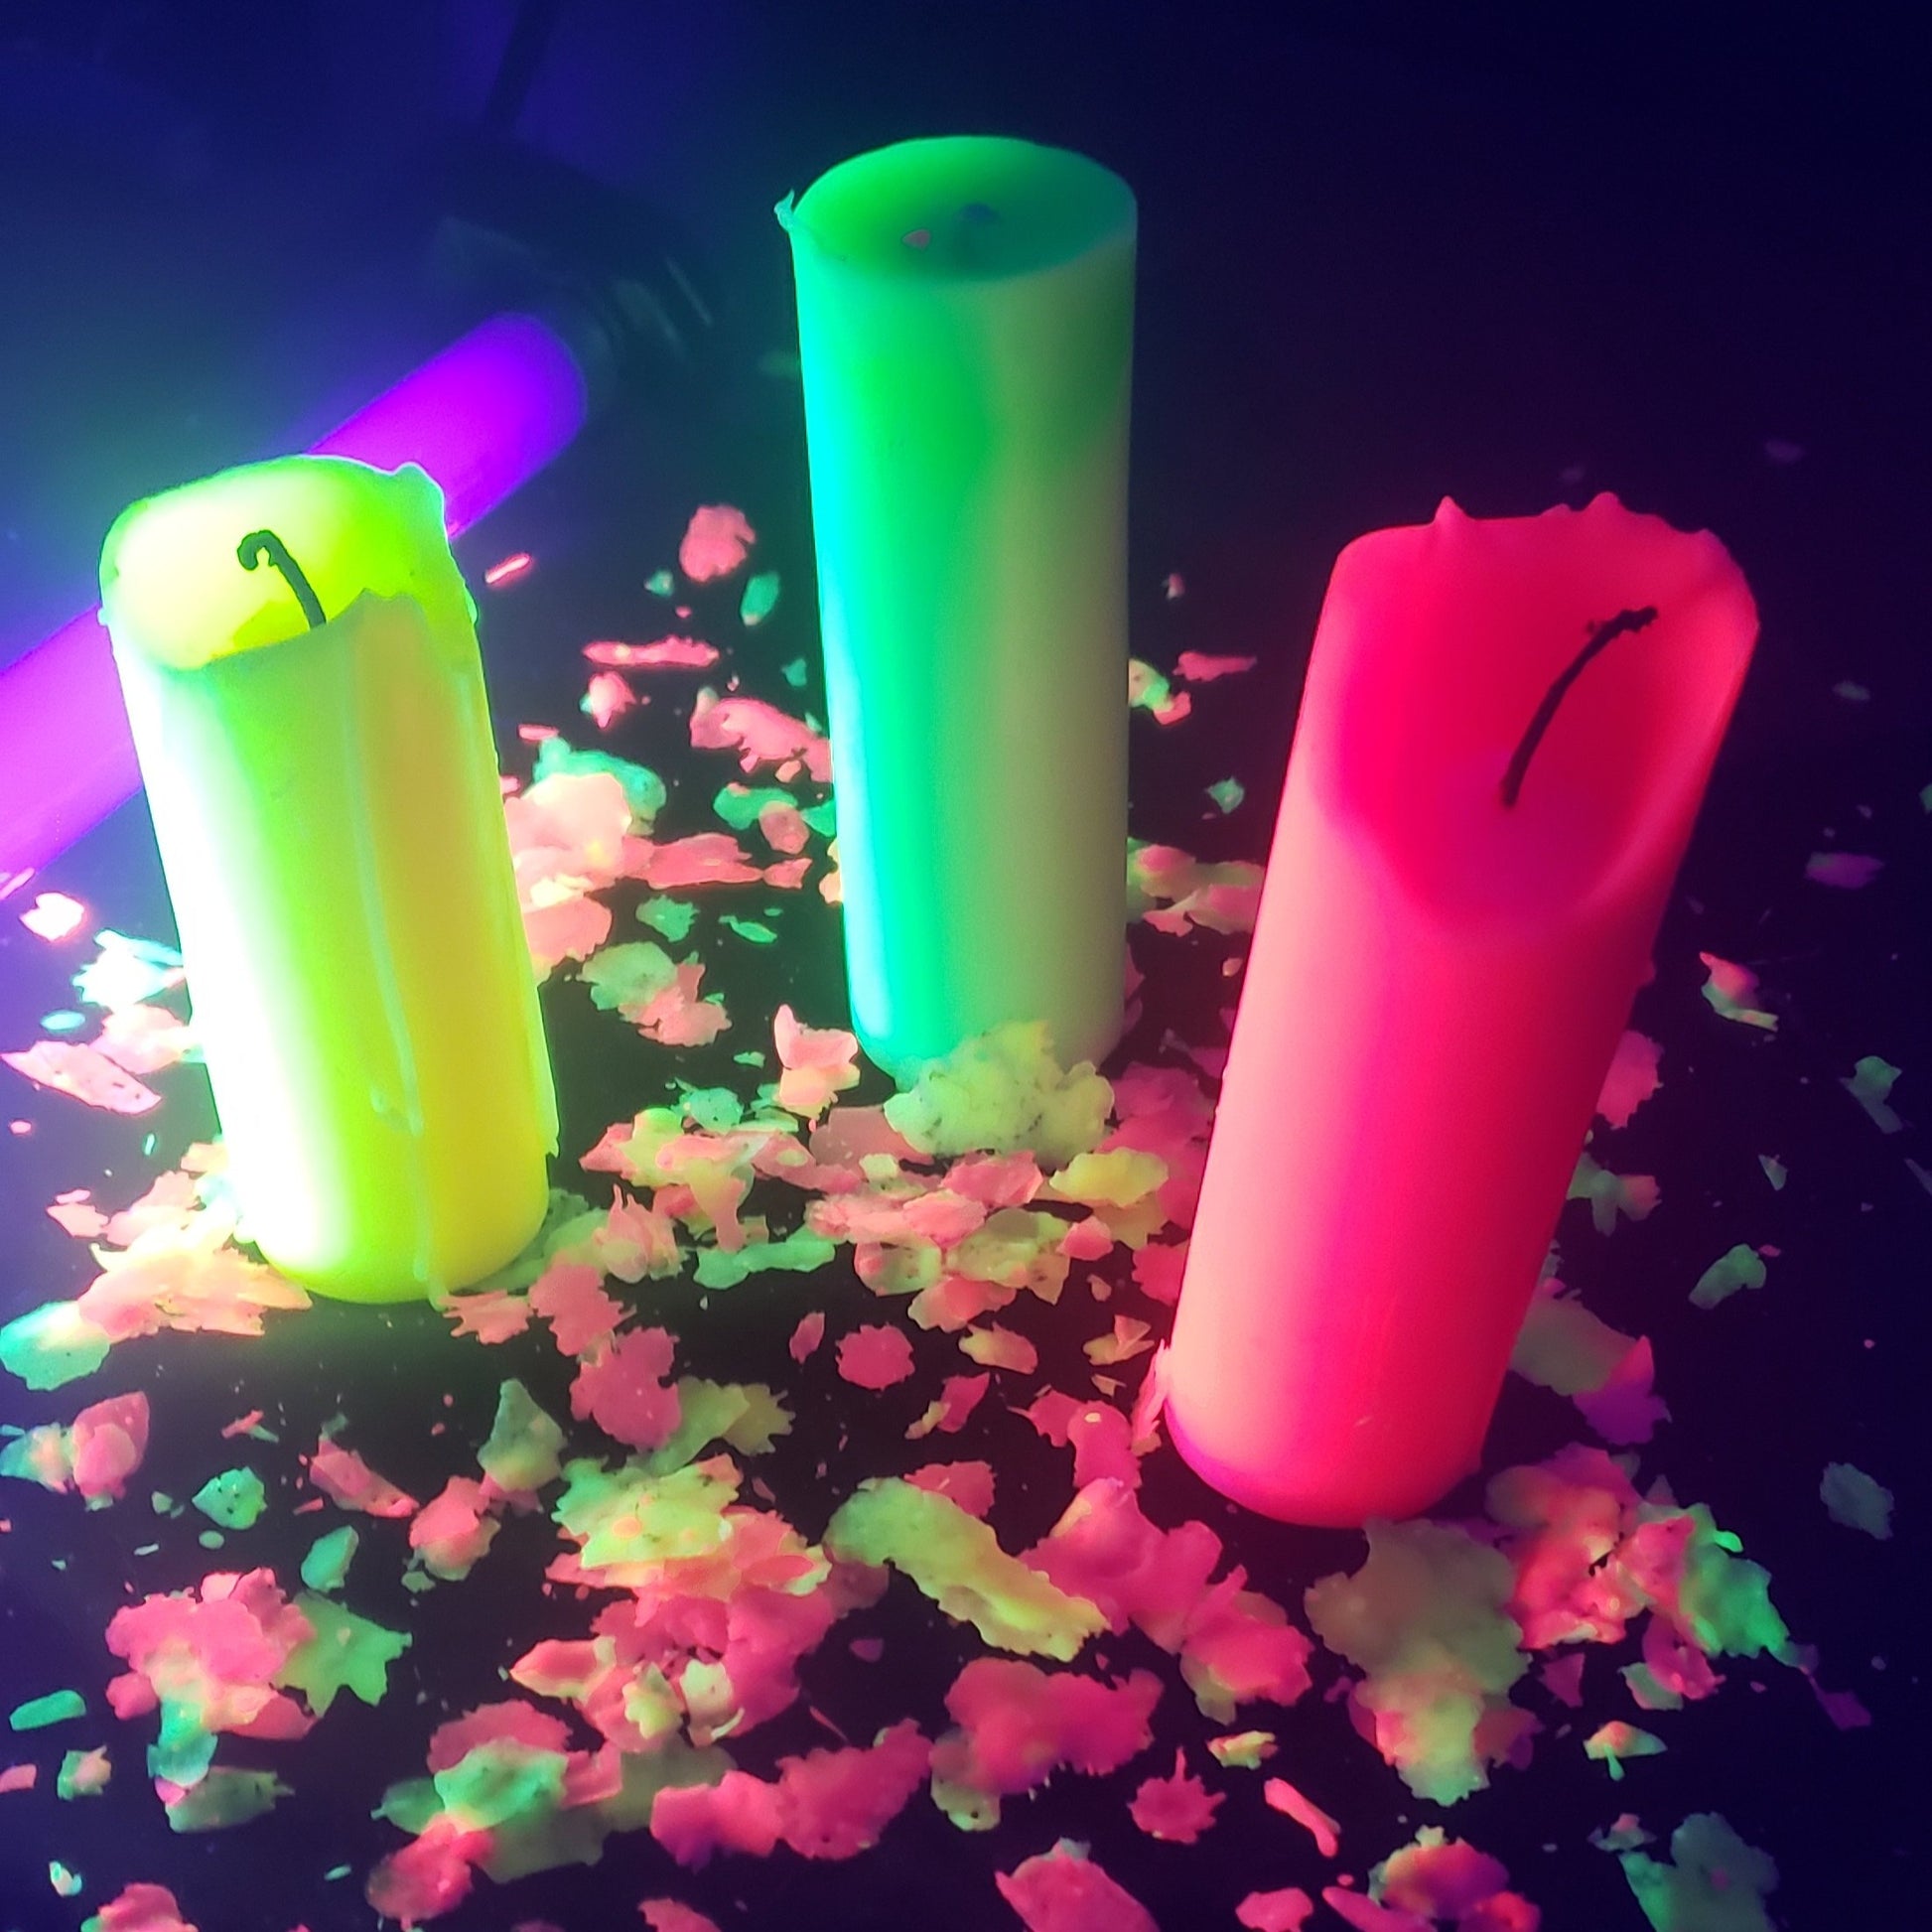 Three different colored Neon Unscented Paraffin Play Pillar Candles.